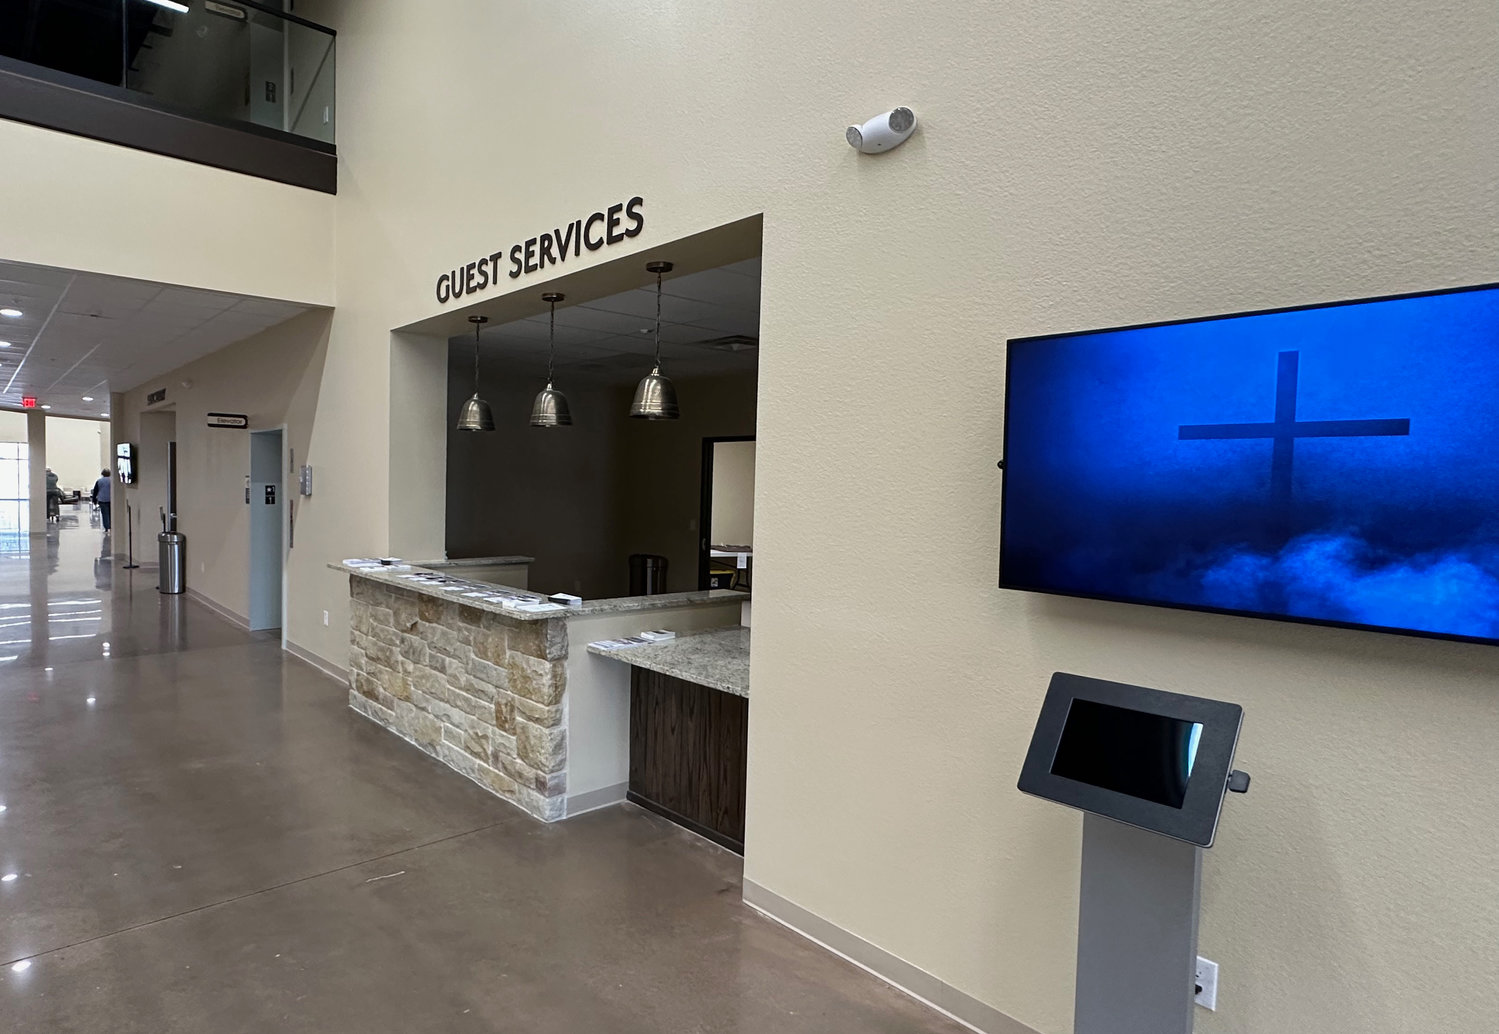 The new church has a guest services area on the way to the atrium. There are four entrances to the church compared to only one at the old one.